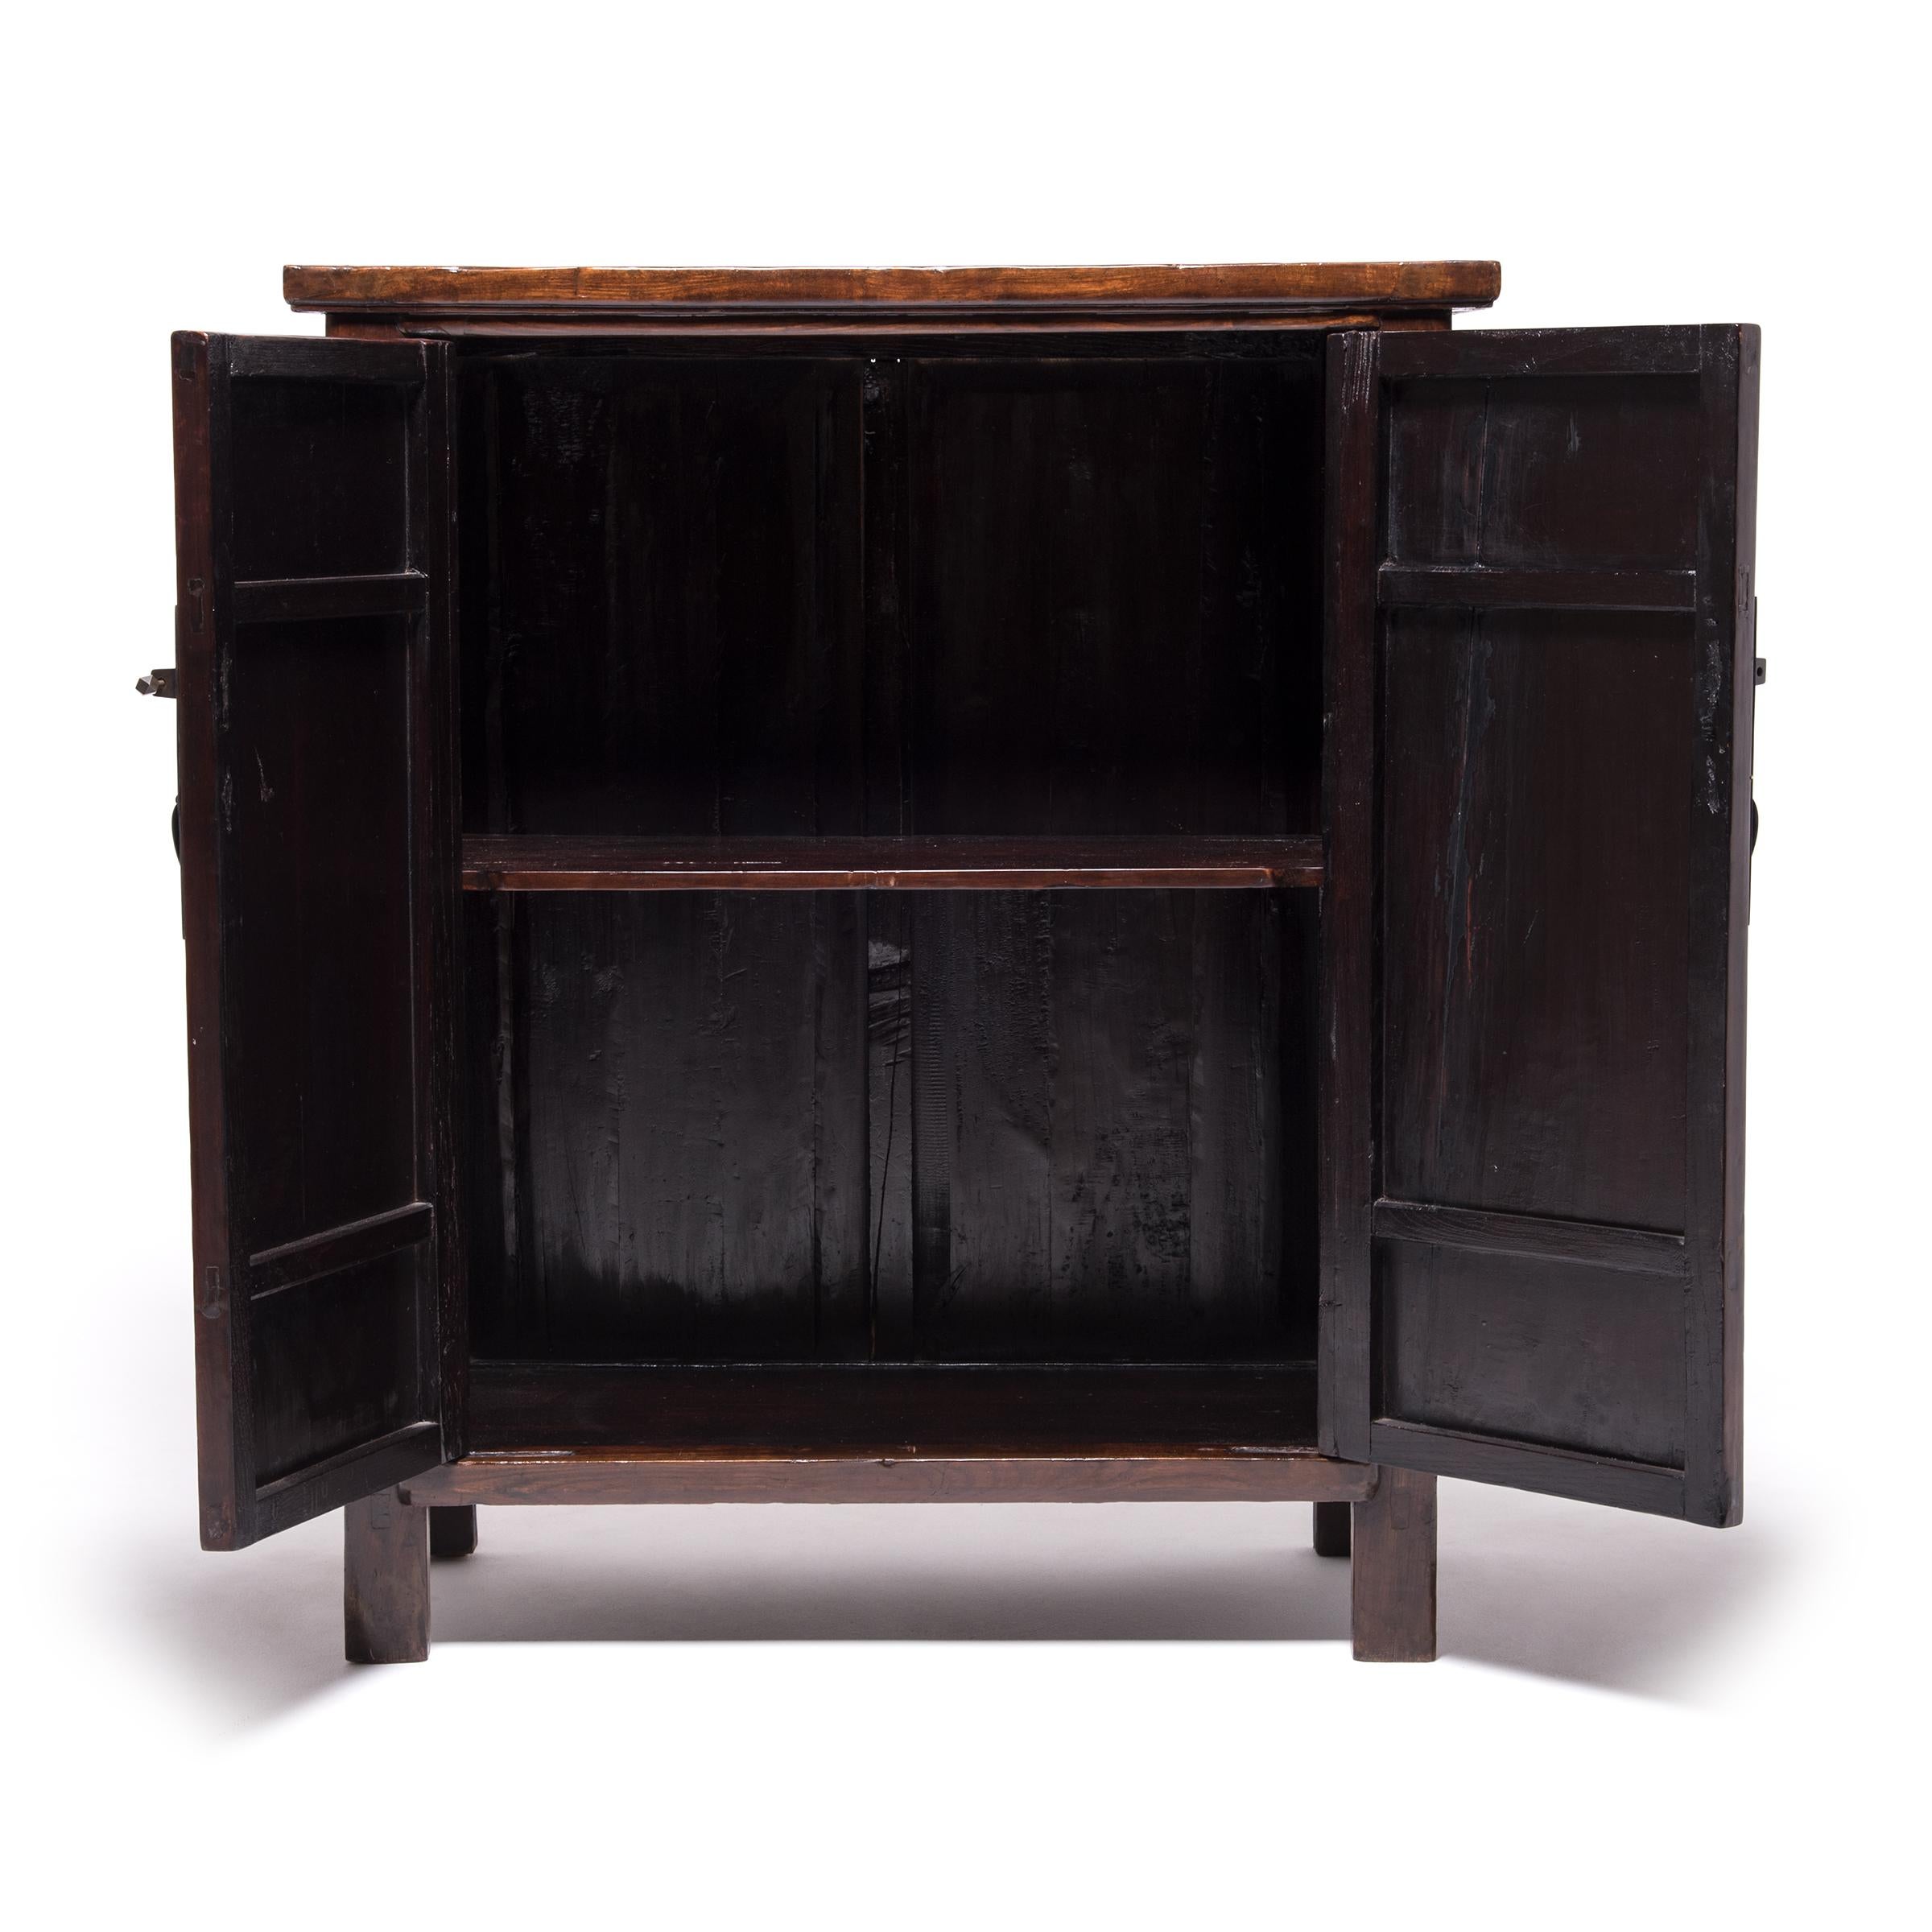 Classic Chinese furniture design is characterized by the flawless construction, purity of line, and dedication to detail you see here in this two-door cabinet. This beautiful elmwood cabinet was created in the mid-19th century by an artisan from